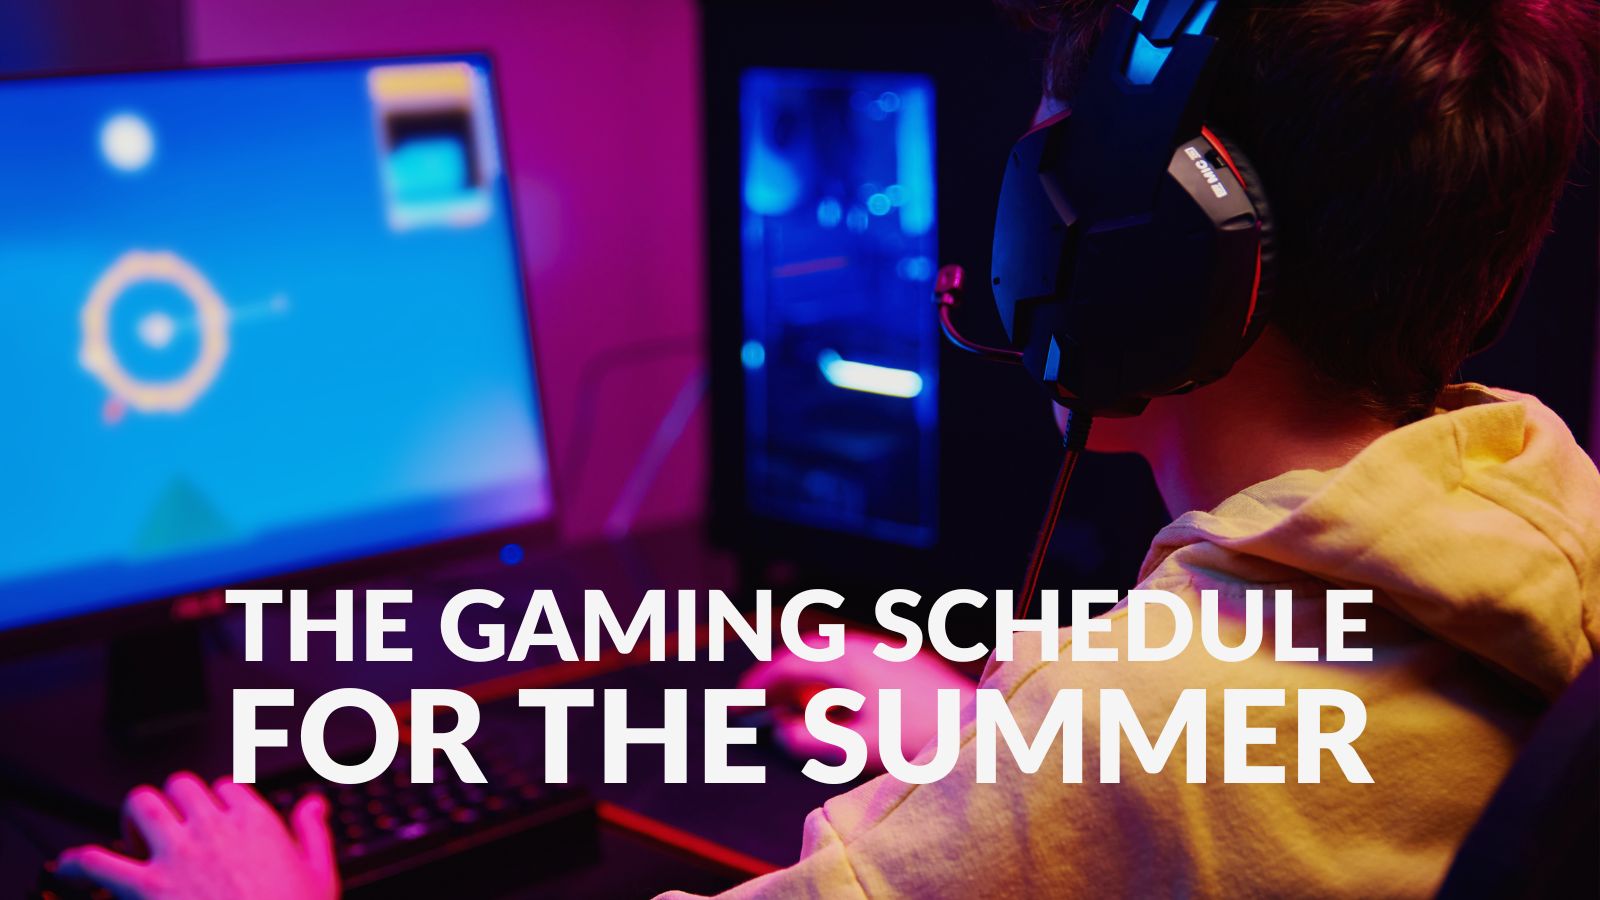 The Gaming Schedule for the Summer